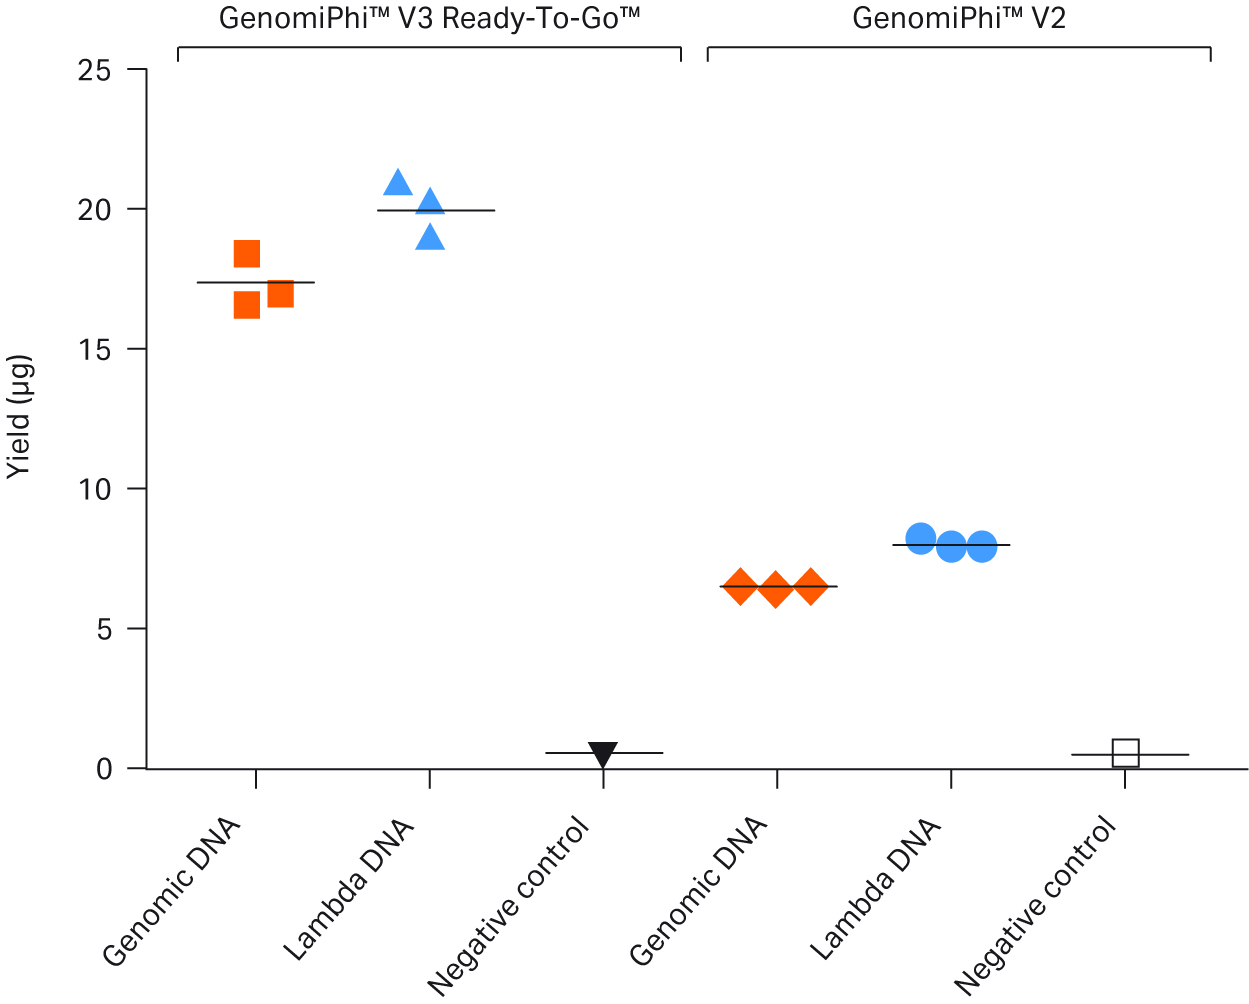 A comparative performance evaluation of GenomiPhi™ V3 Ready-To-Go™ and GenomiPhi™ V2 DNA amplification kits